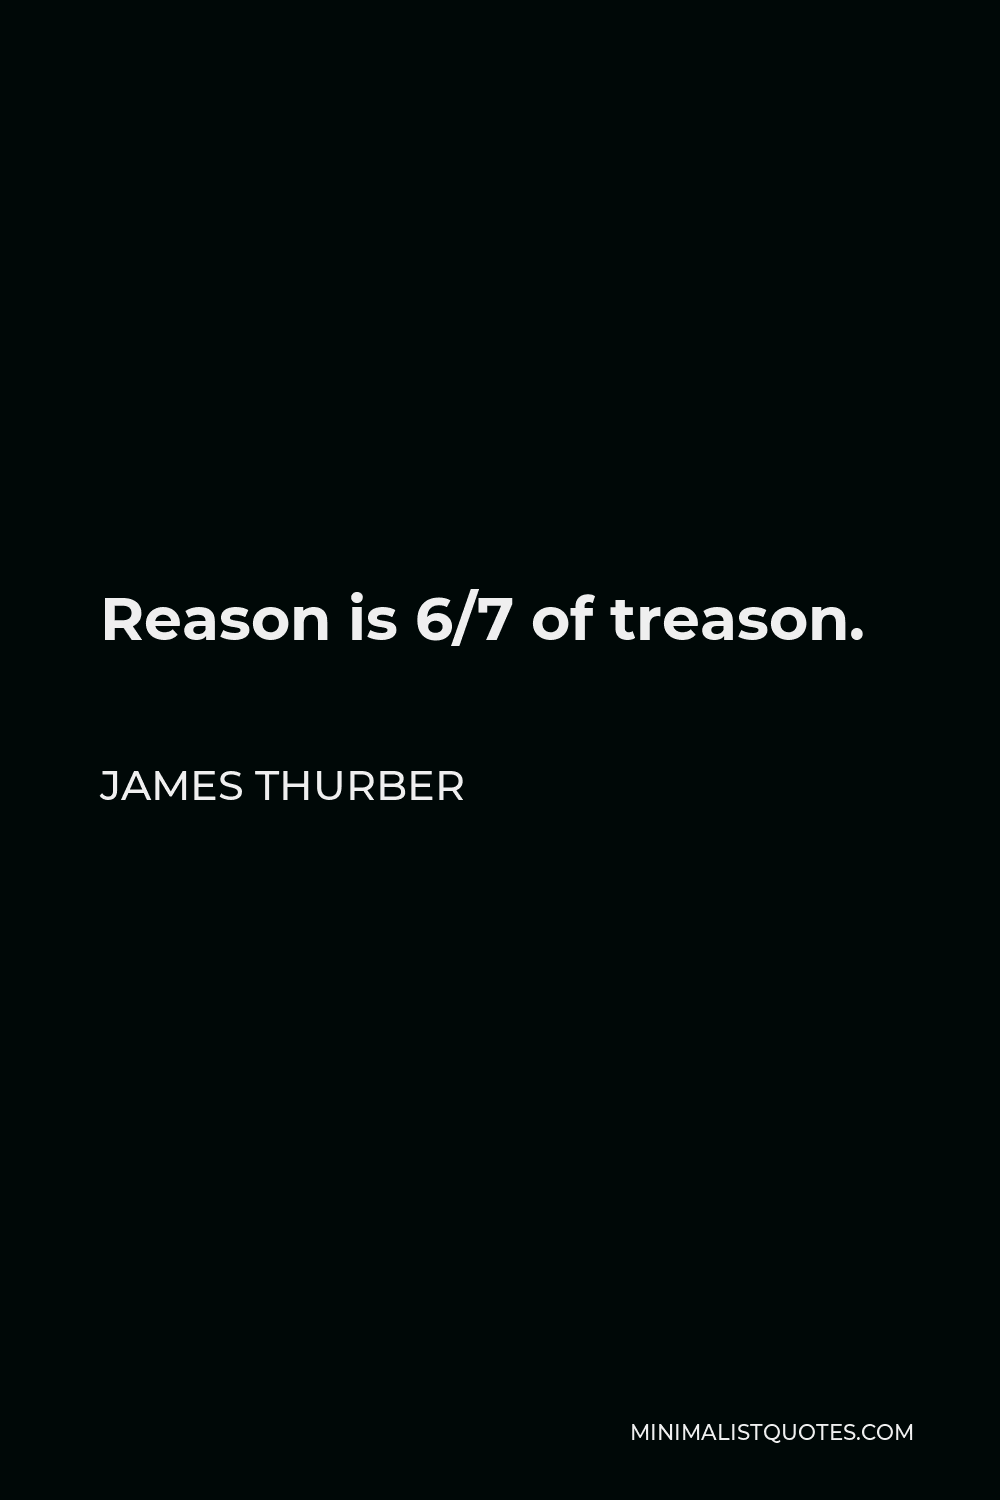 James Thurber Quote - Reason is 6/7 of treason.